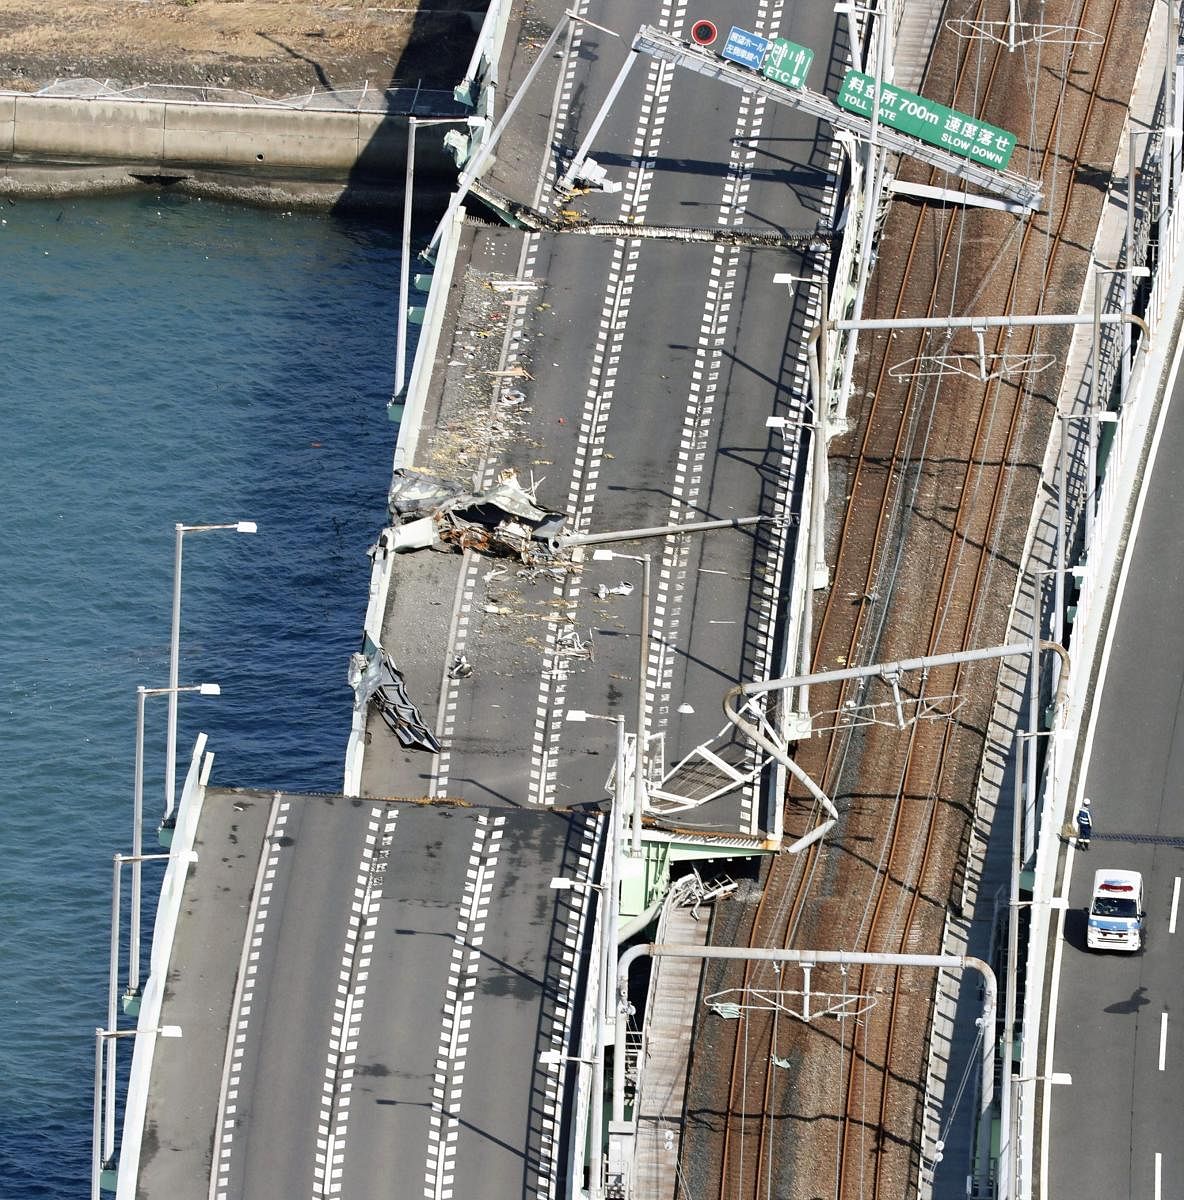 The bridge connecting Kansai International Airport in Osaka, western Japan, Wednesday, a day after a tanker slammed into its side by a powerful typhoon. About 3,000 passengers stranded by Typhoon Jebi overnight at the offshore Japanese airport begun retur